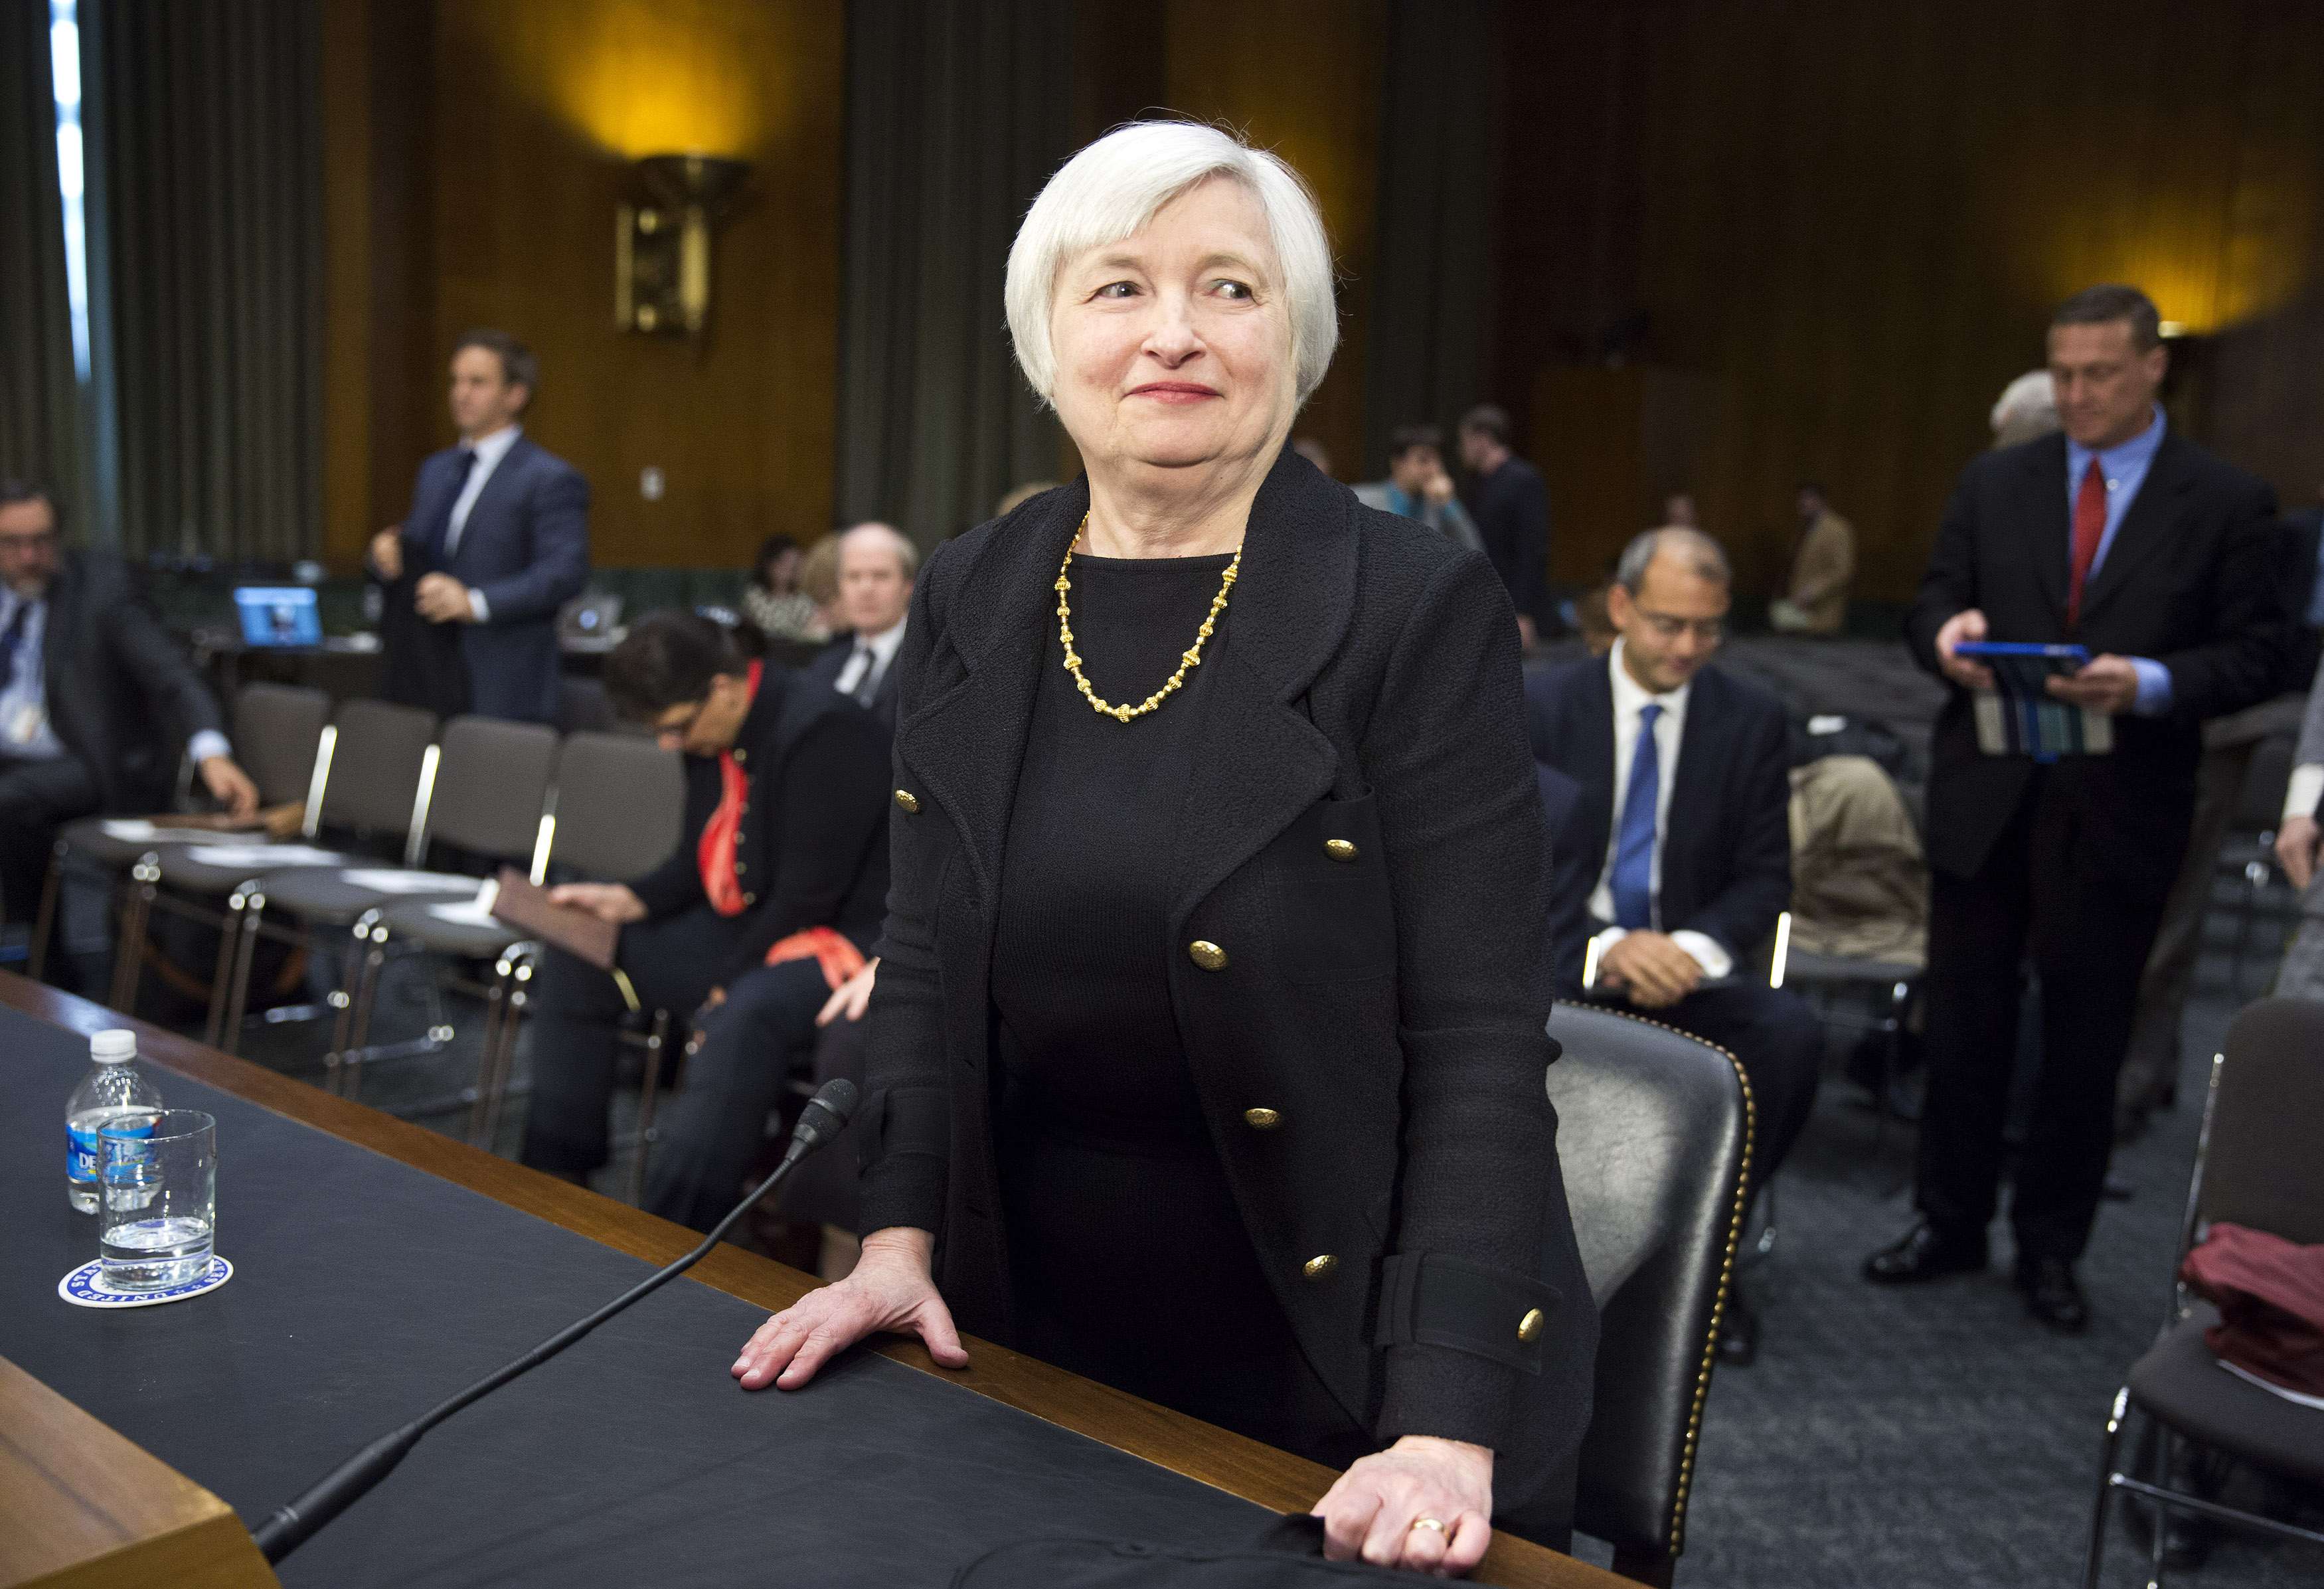 U.S. Federal Reserve Vice Chair Yellen stands after testifying during a confirmation hearing on her nomination to be the next chairman of the U.S. Federal Reserve before the Senate Banking Committee in Washington.